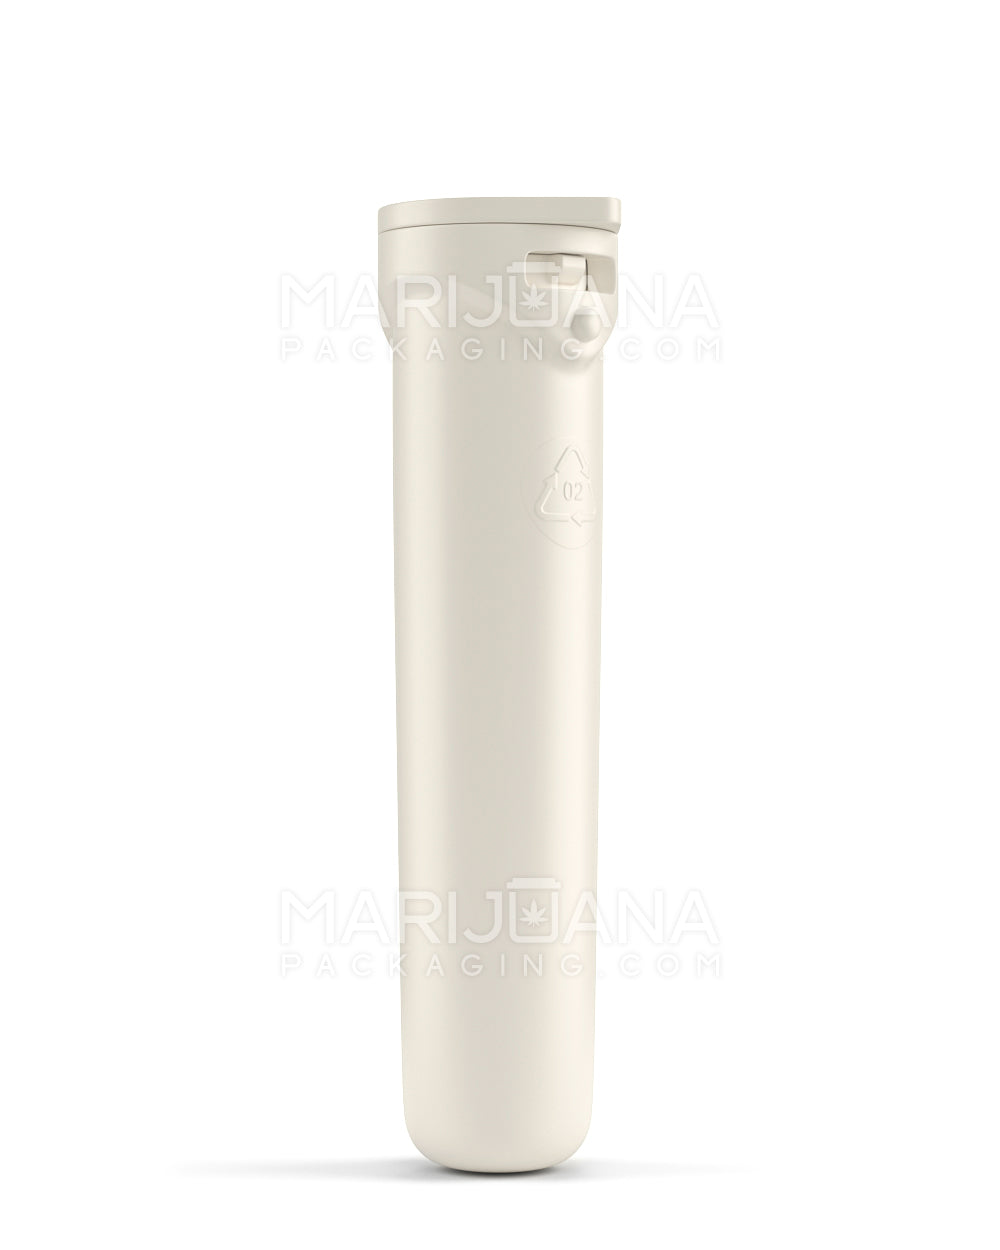 Child Resistant & Sustainable | 100% Recyclable "Line-up Arrow" Reclaimed Ocean Plastic Pre-Roll Tubes | 78mm - Beige - 1